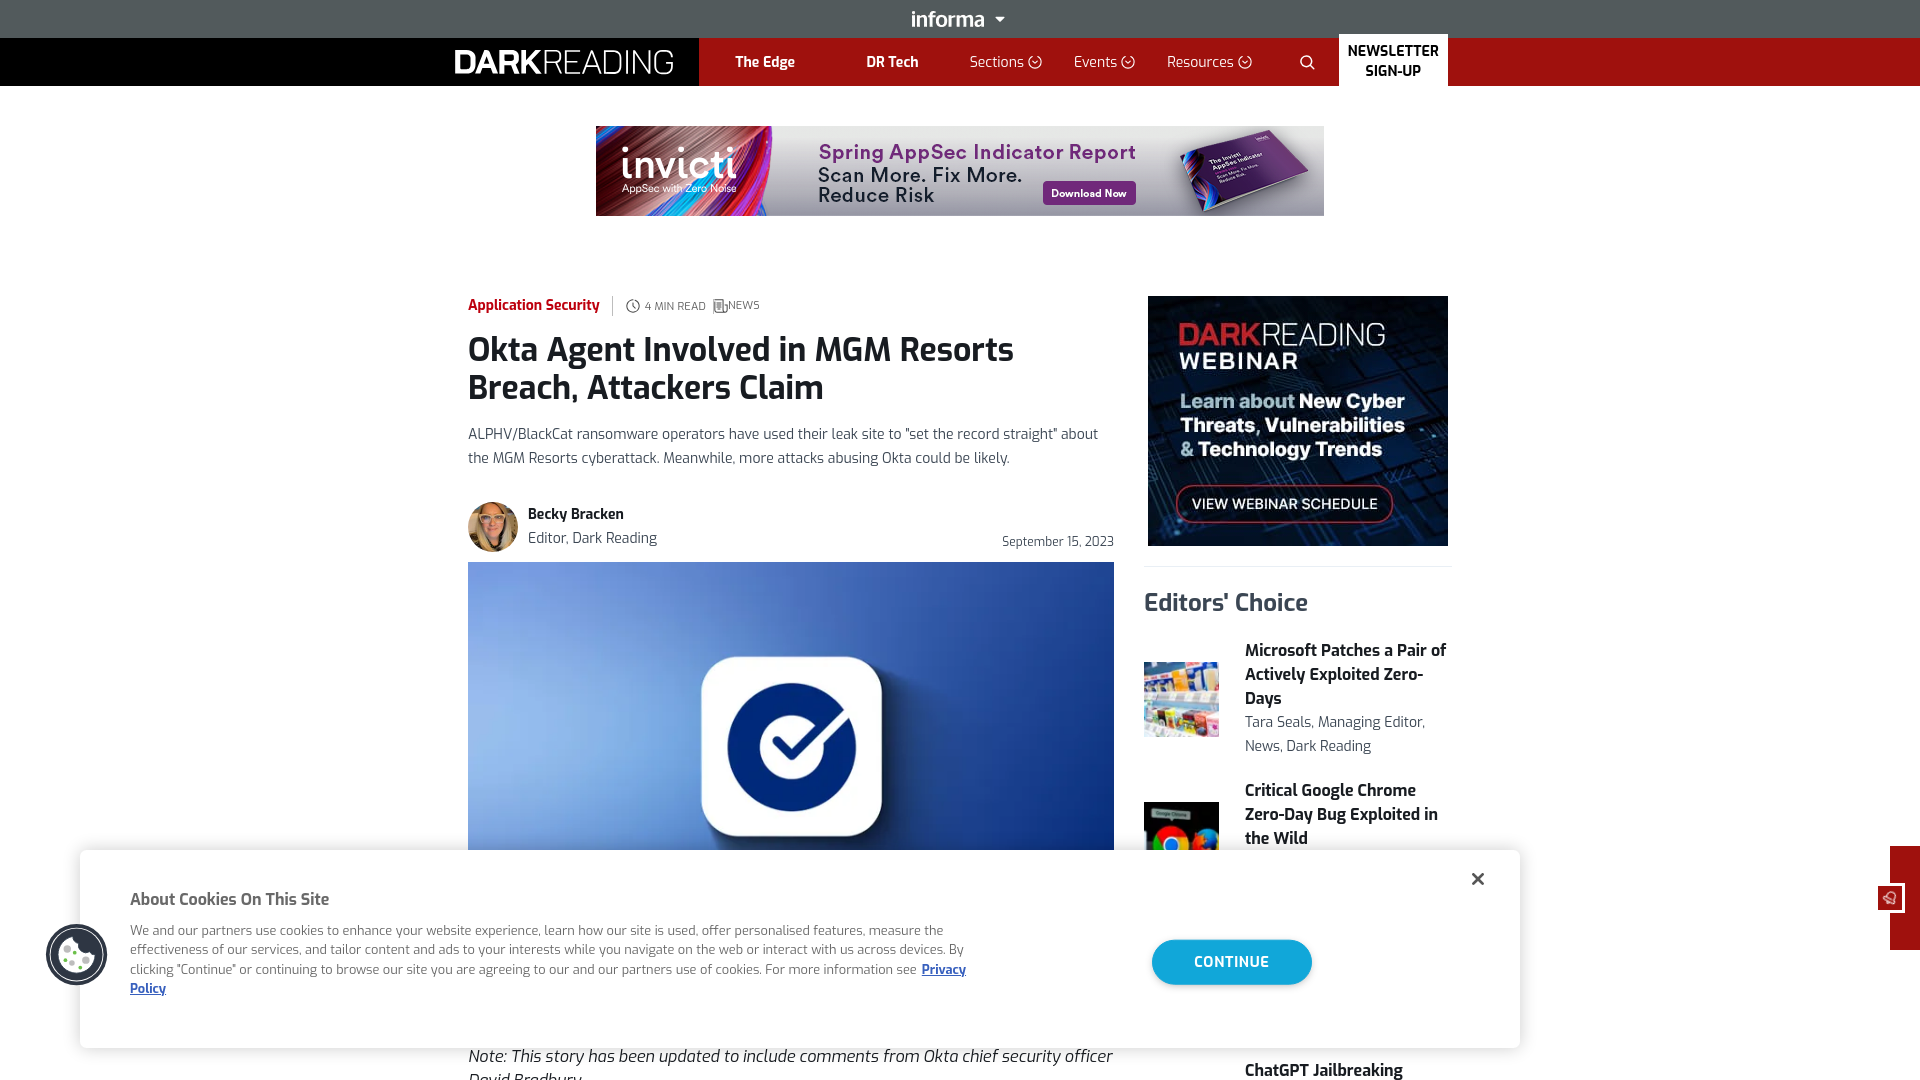 Okta Agent Involved in MGM Resorts Breach, Attackers Claim